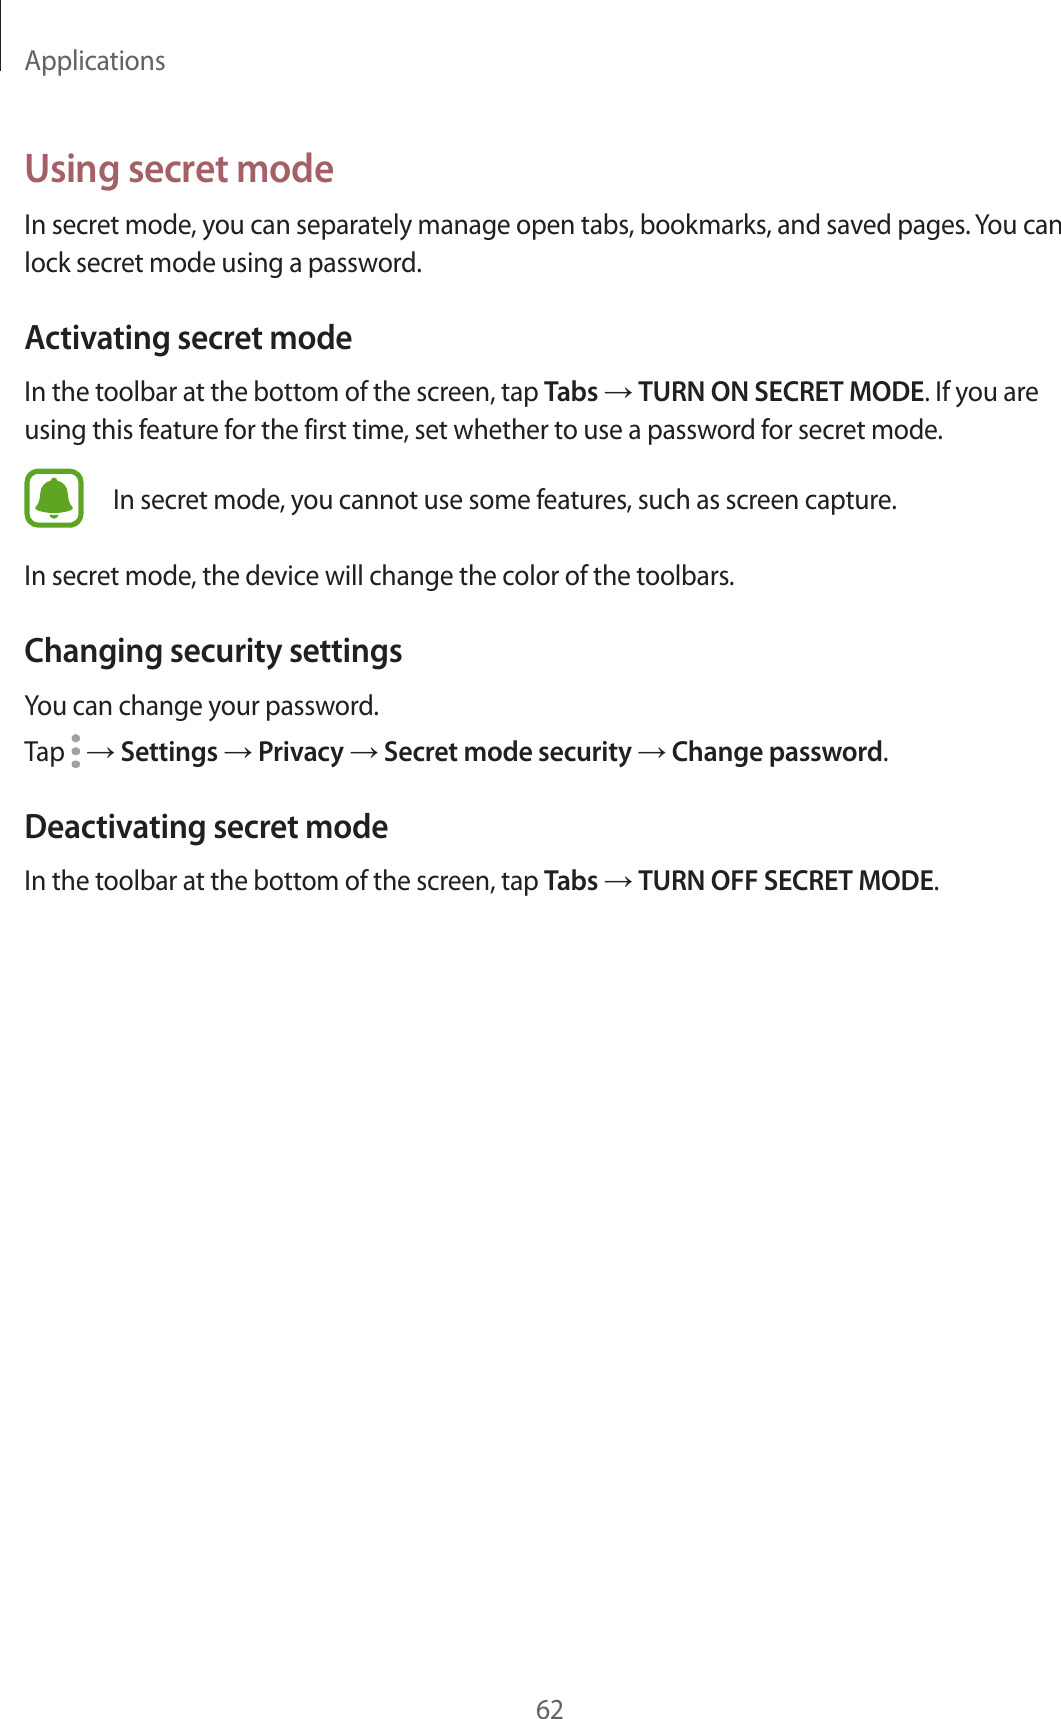 Applications62Using secret modeIn secret mode, you can separately manage open tabs, bookmarks, and saved pages. You can lock secret mode using a password.Activating secret modeIn the toolbar at the bottom of the screen, tap Tabs → TURN ON SECRET MODE. If you are using this feature for the first time, set whether to use a password for secret mode.In secret mode, you cannot use some features, such as screen capture.In secret mode, the device will change the color of the toolbars.Changing security settingsYou can change your password.Tap   → Settings → Privacy → Secret mode security → Change password.Deactivating secret modeIn the toolbar at the bottom of the screen, tap Tabs → TURN OFF SECRET MODE.